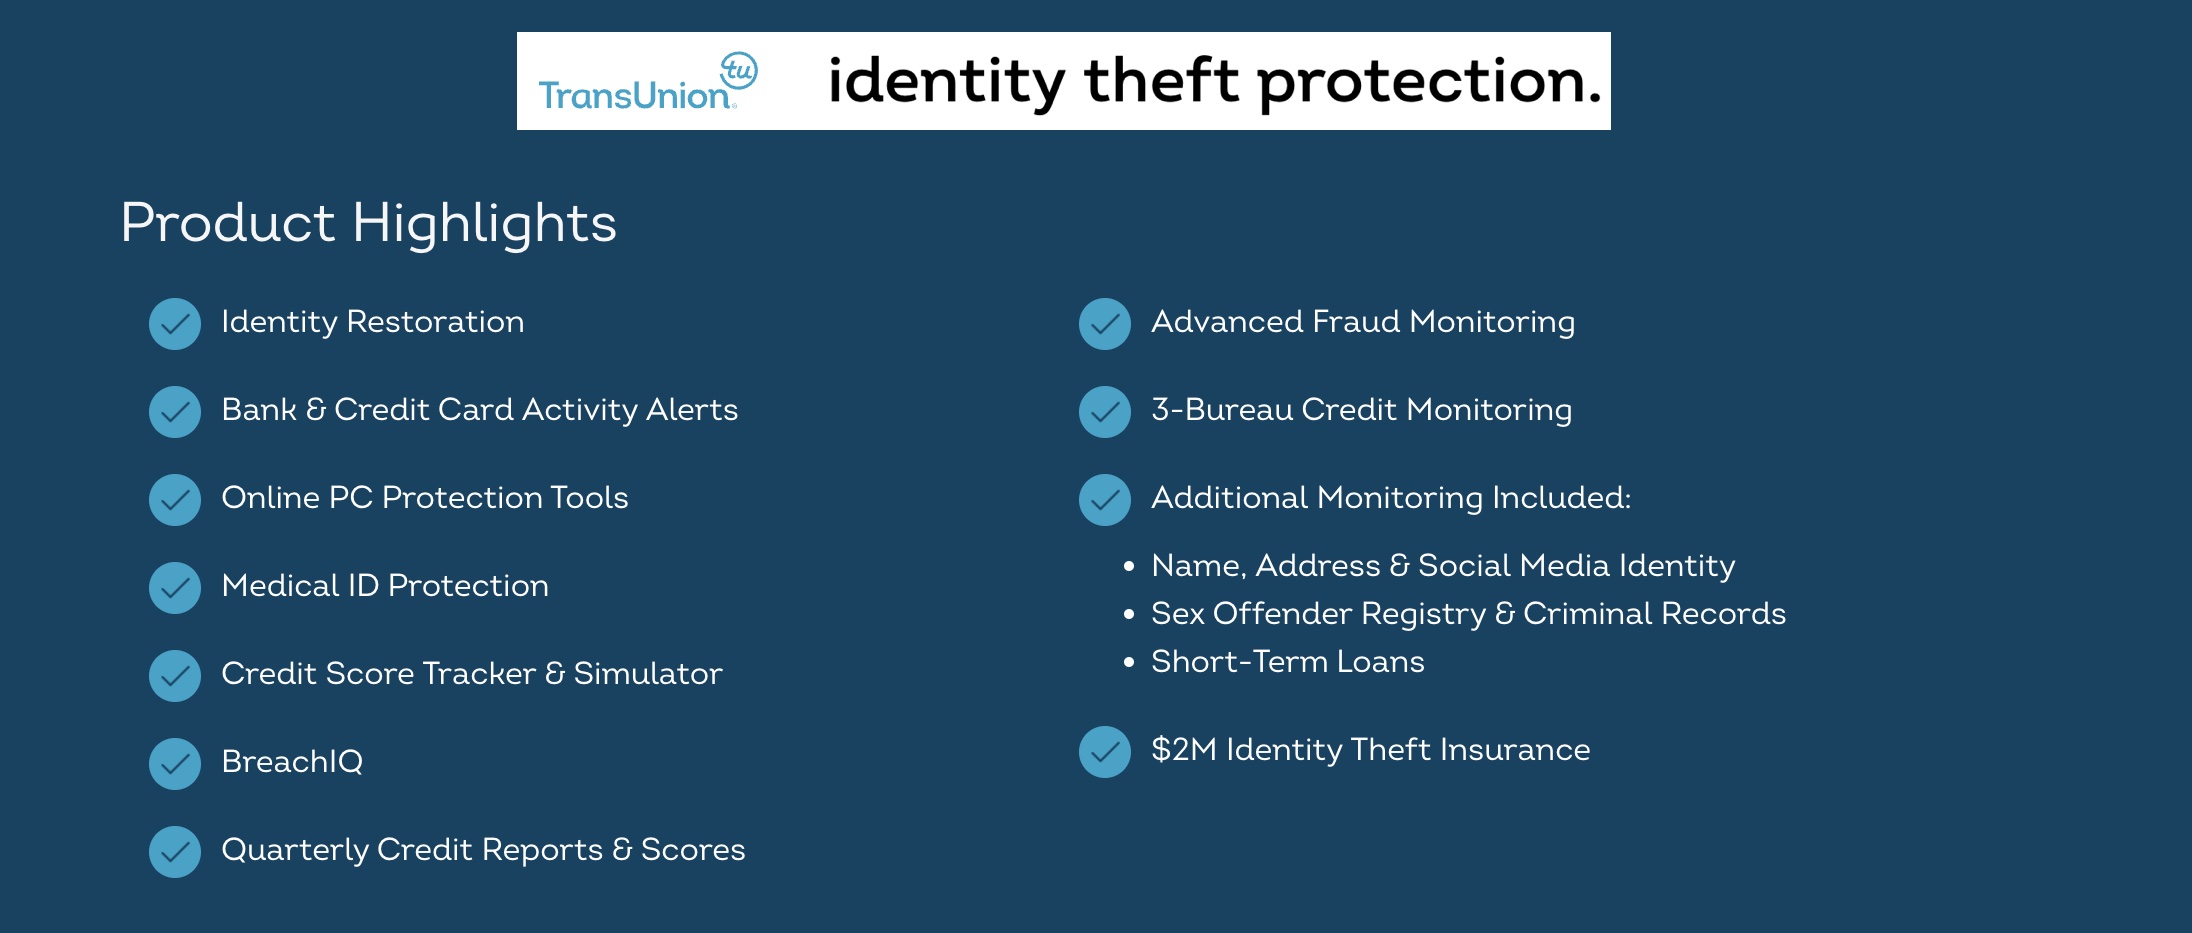 Best Id Theft Protection with Credit Monitoring Services: TransUnion 